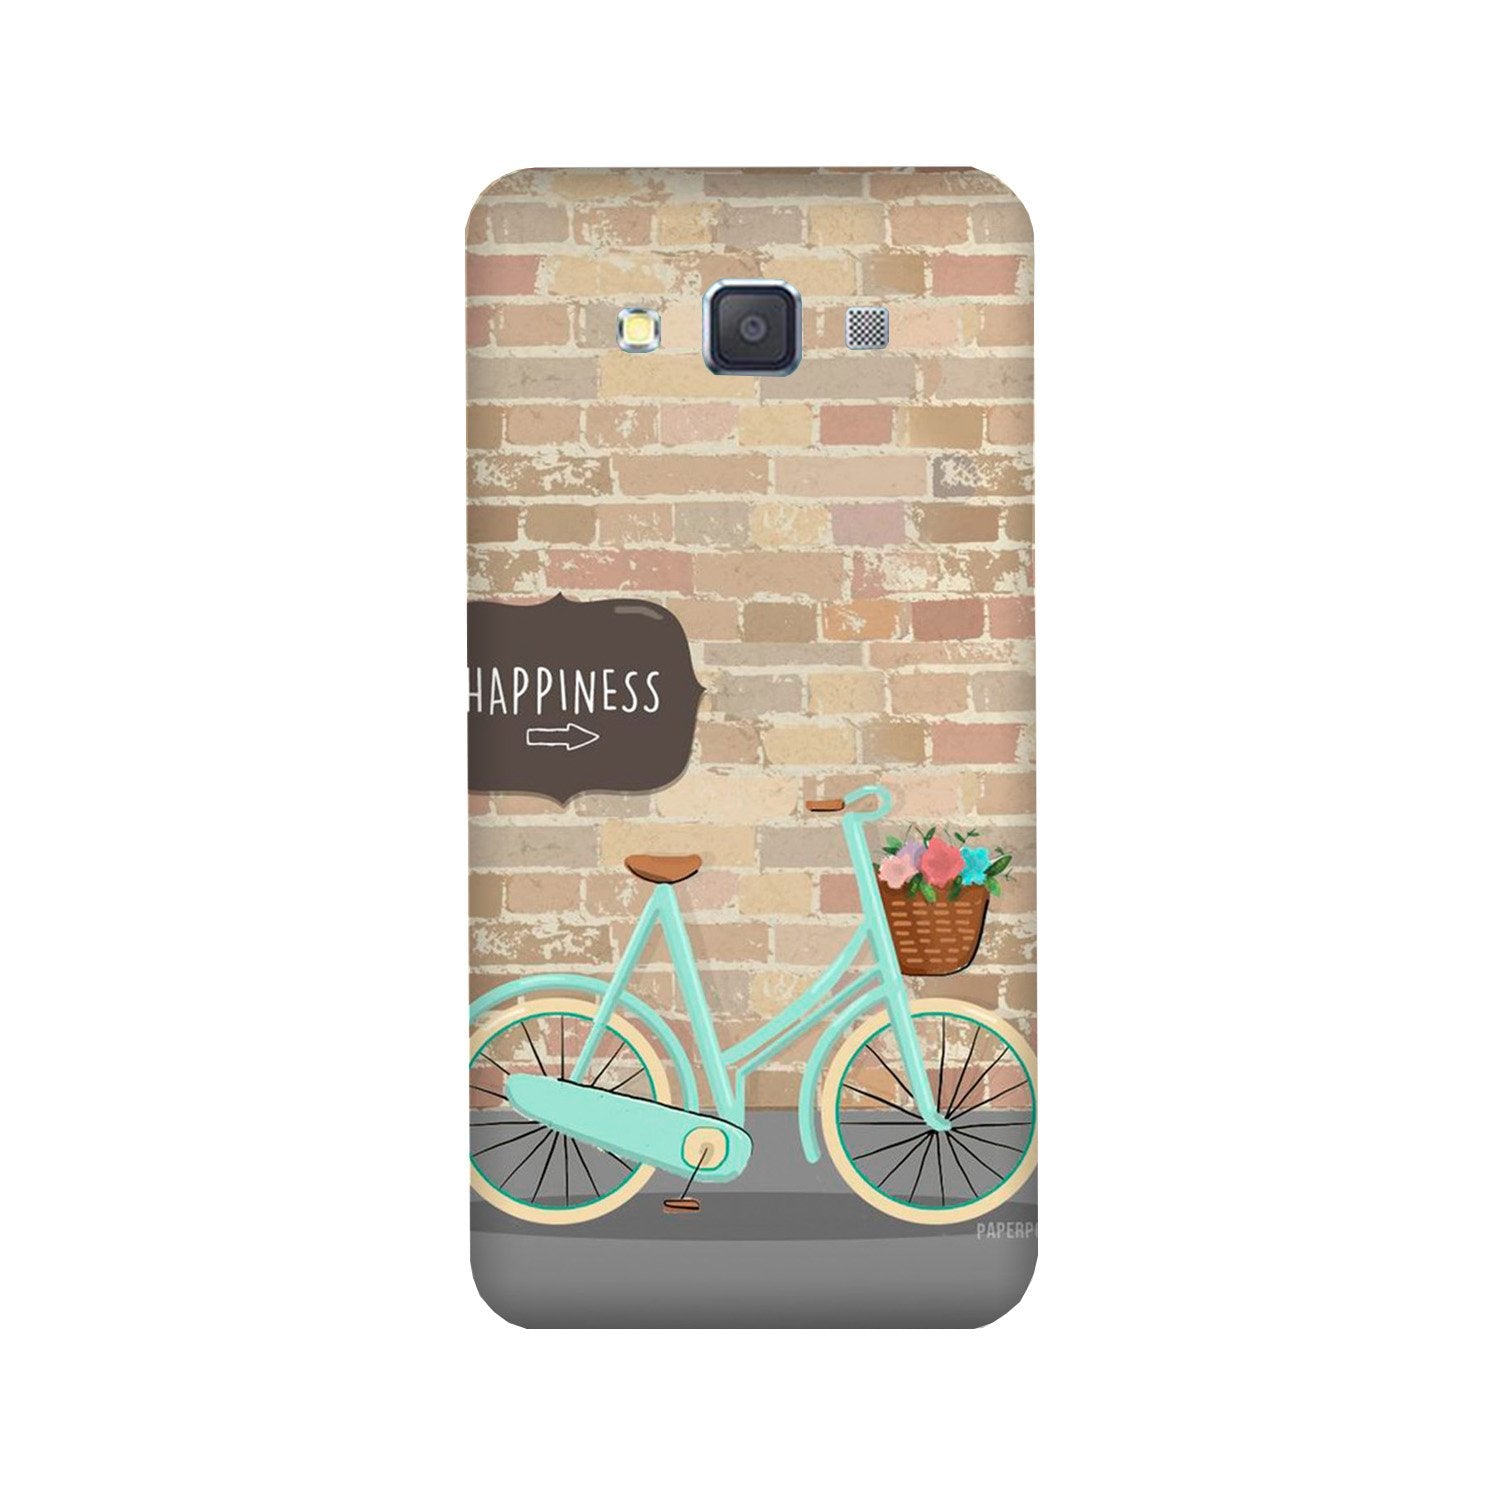 Happiness Case for Galaxy J5 (2016)